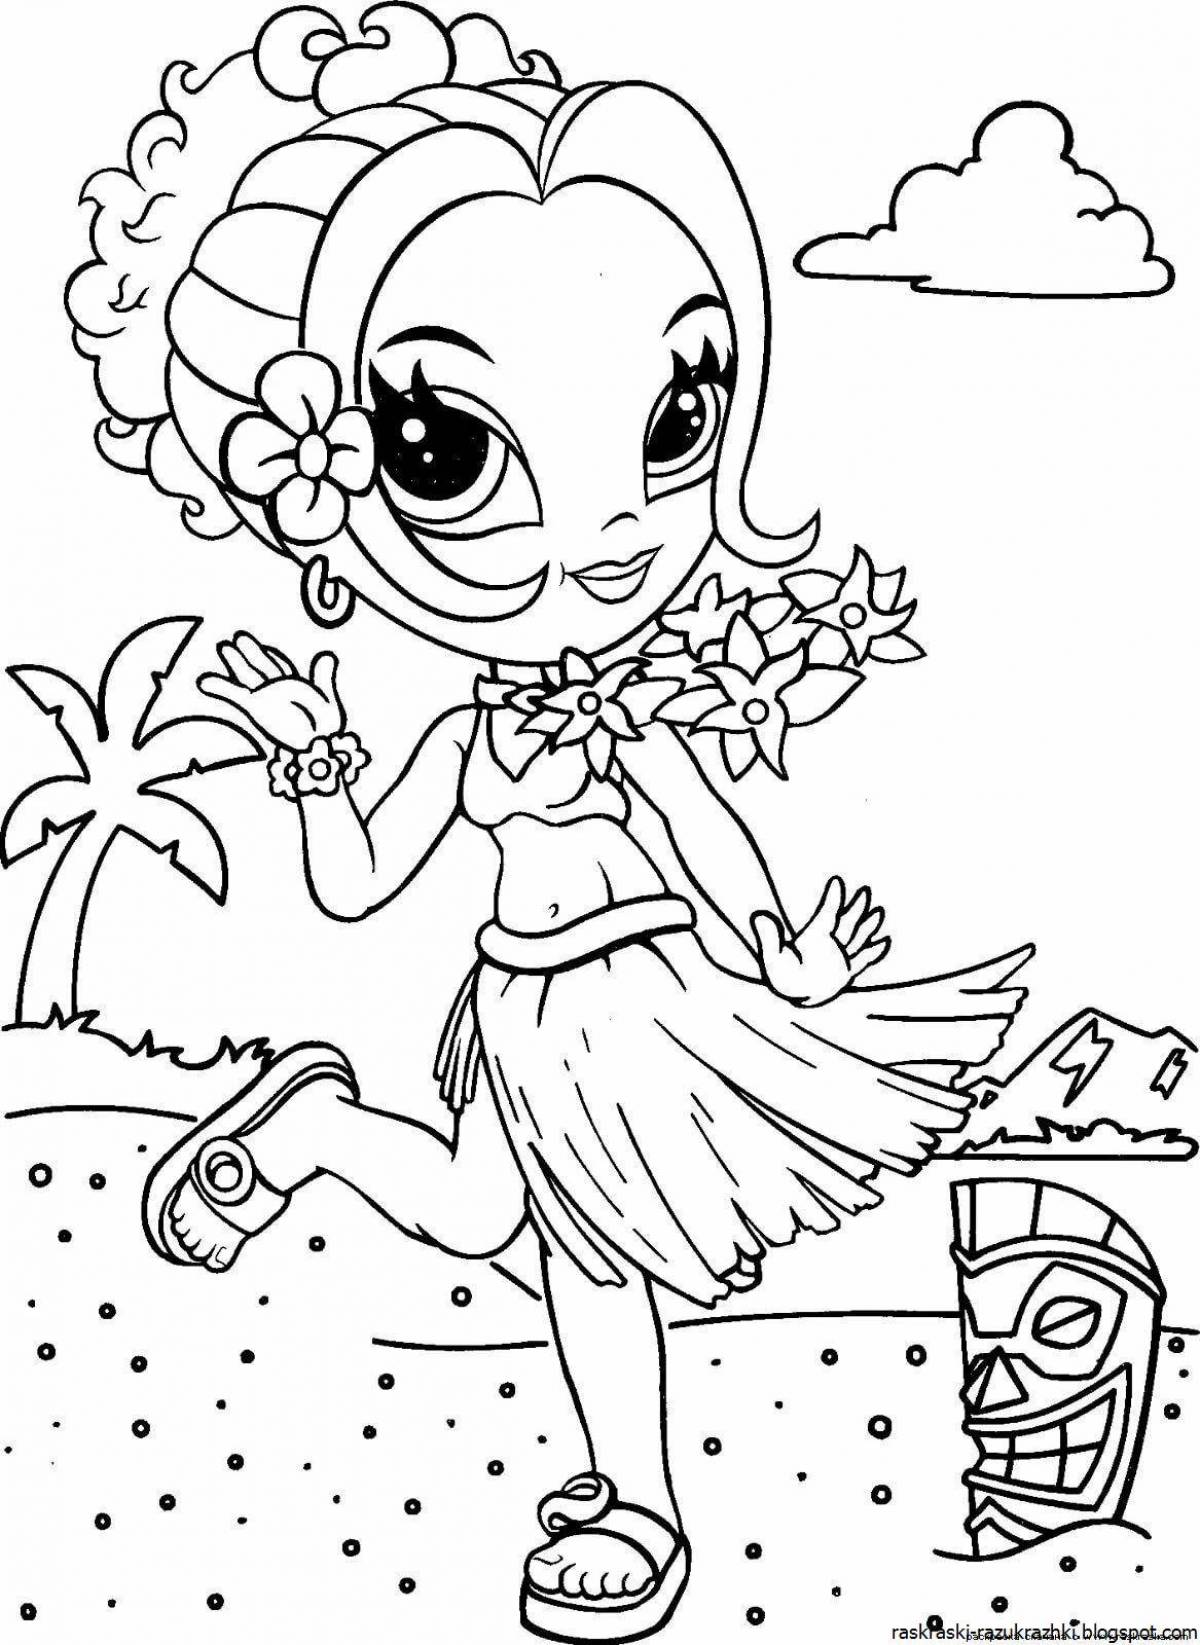 Exquisite coloring book for girls 7-8 years old